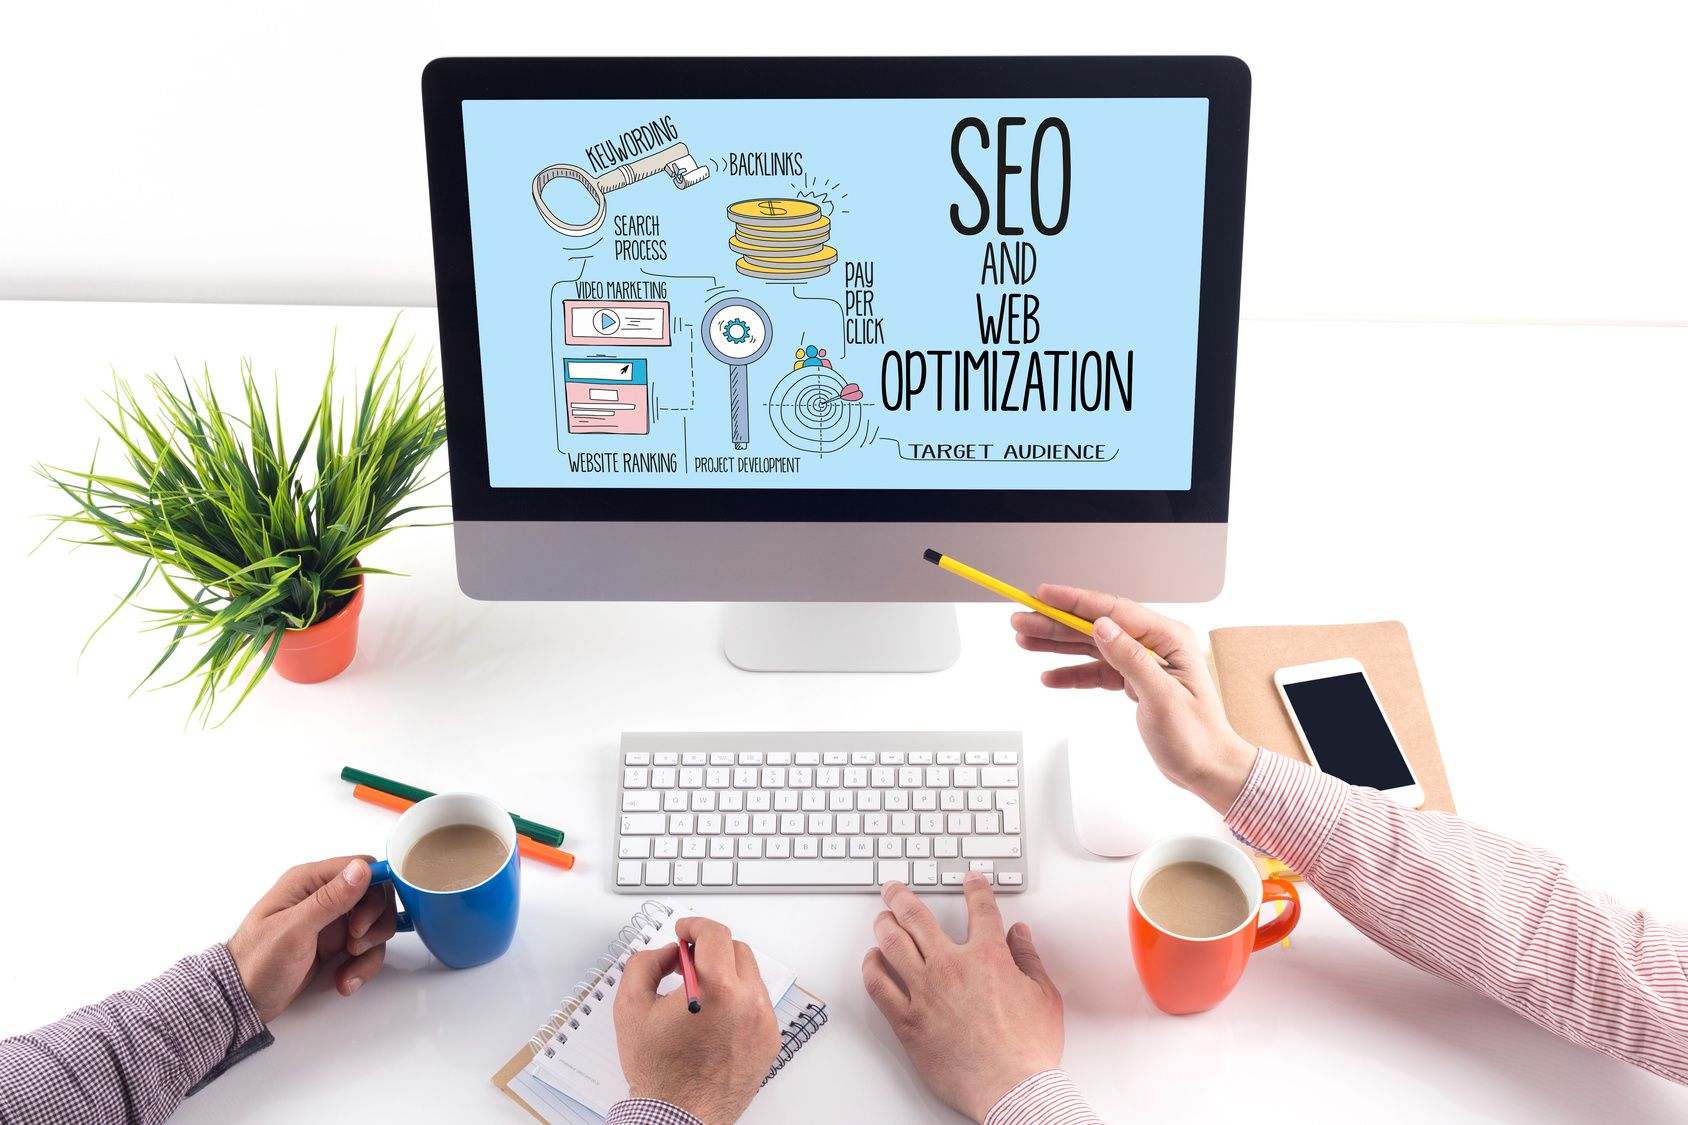 Boost Your Online Presence With Expert Strategies, Services, and Optimization Techniques | seo, Search Engine Marketing, SEO Services, SEO Marketing